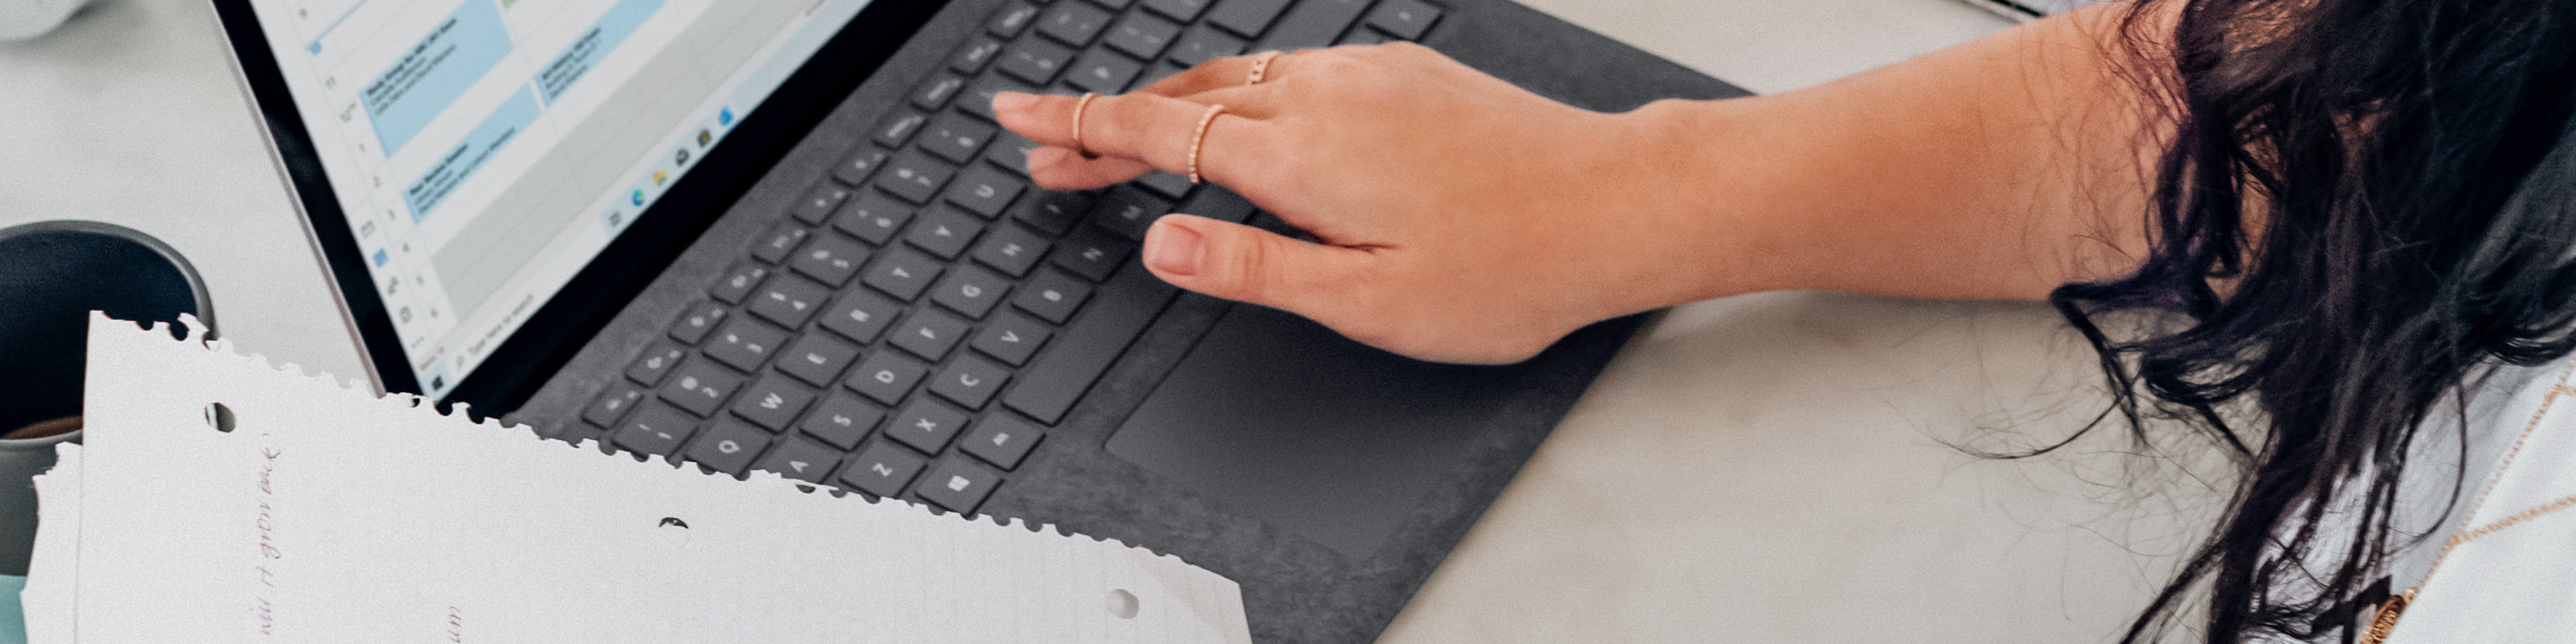 Woman holding papers in one hand and working at laptop keyboard with other